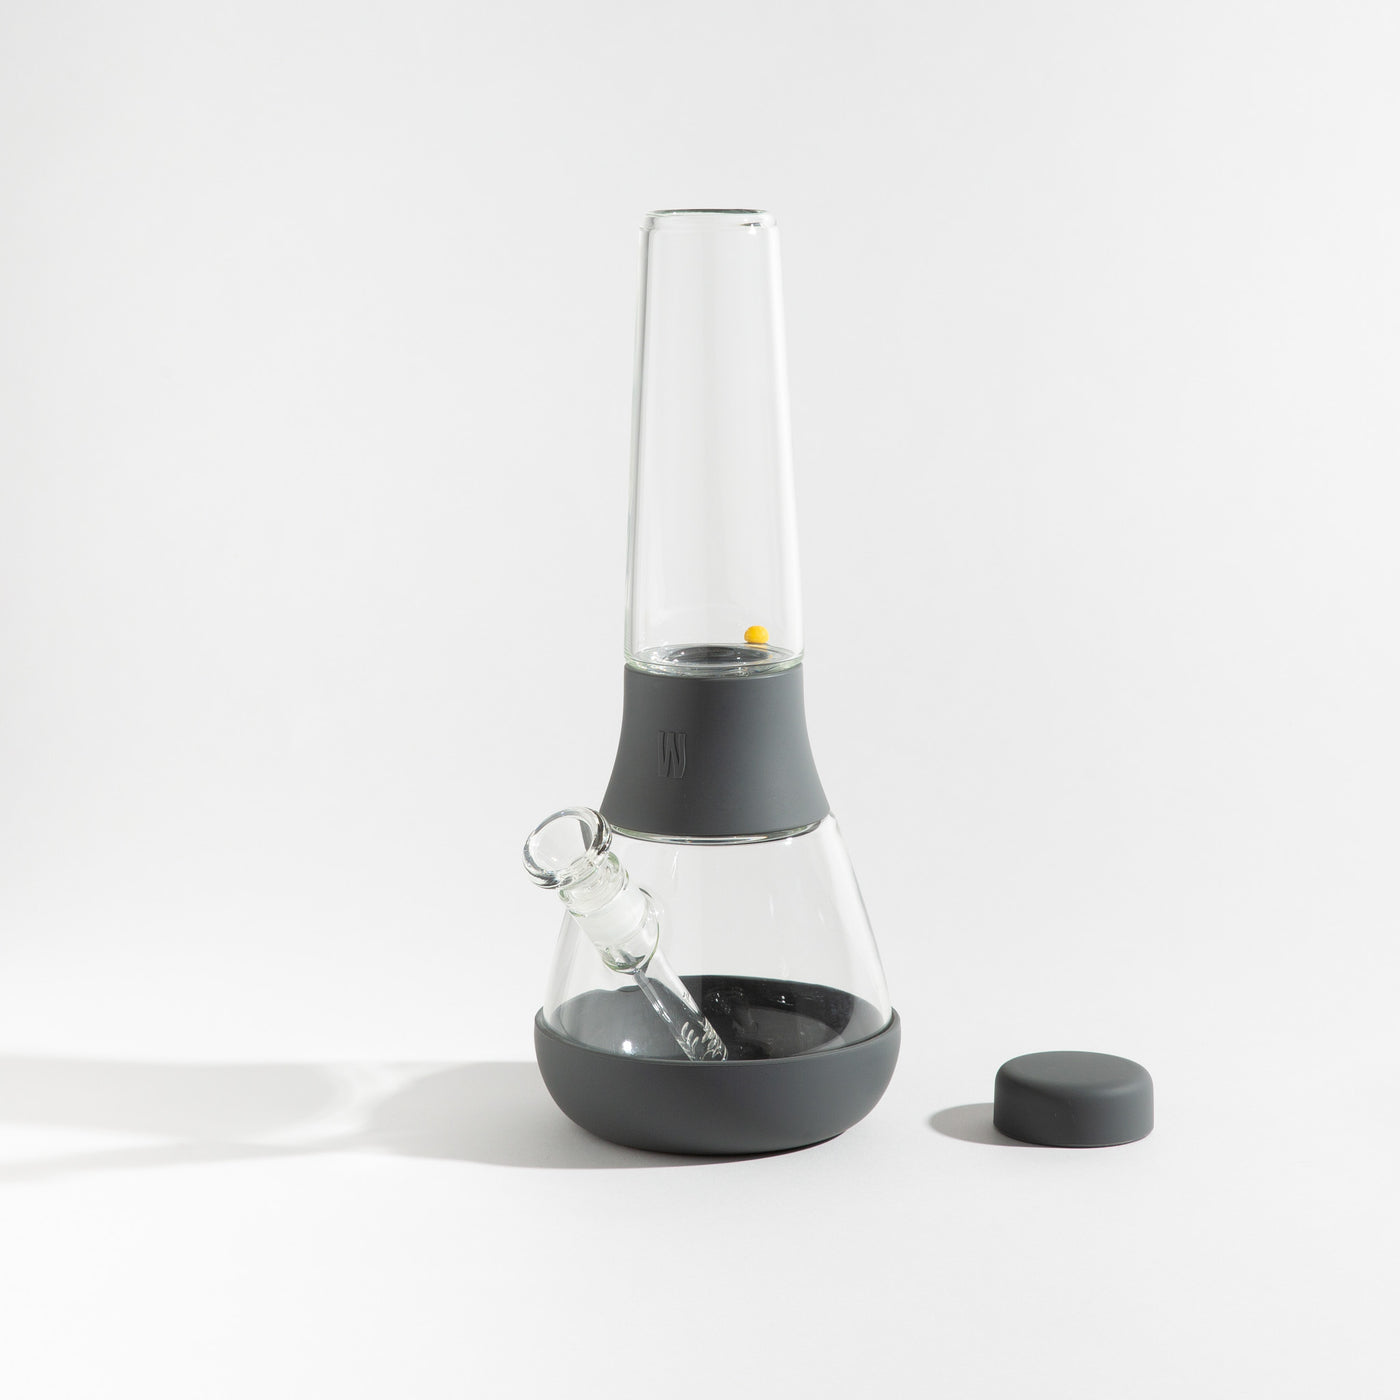 Product photo of a glass waterpipe with smoke gray silicone covers, cap uncovered, placed on a table.